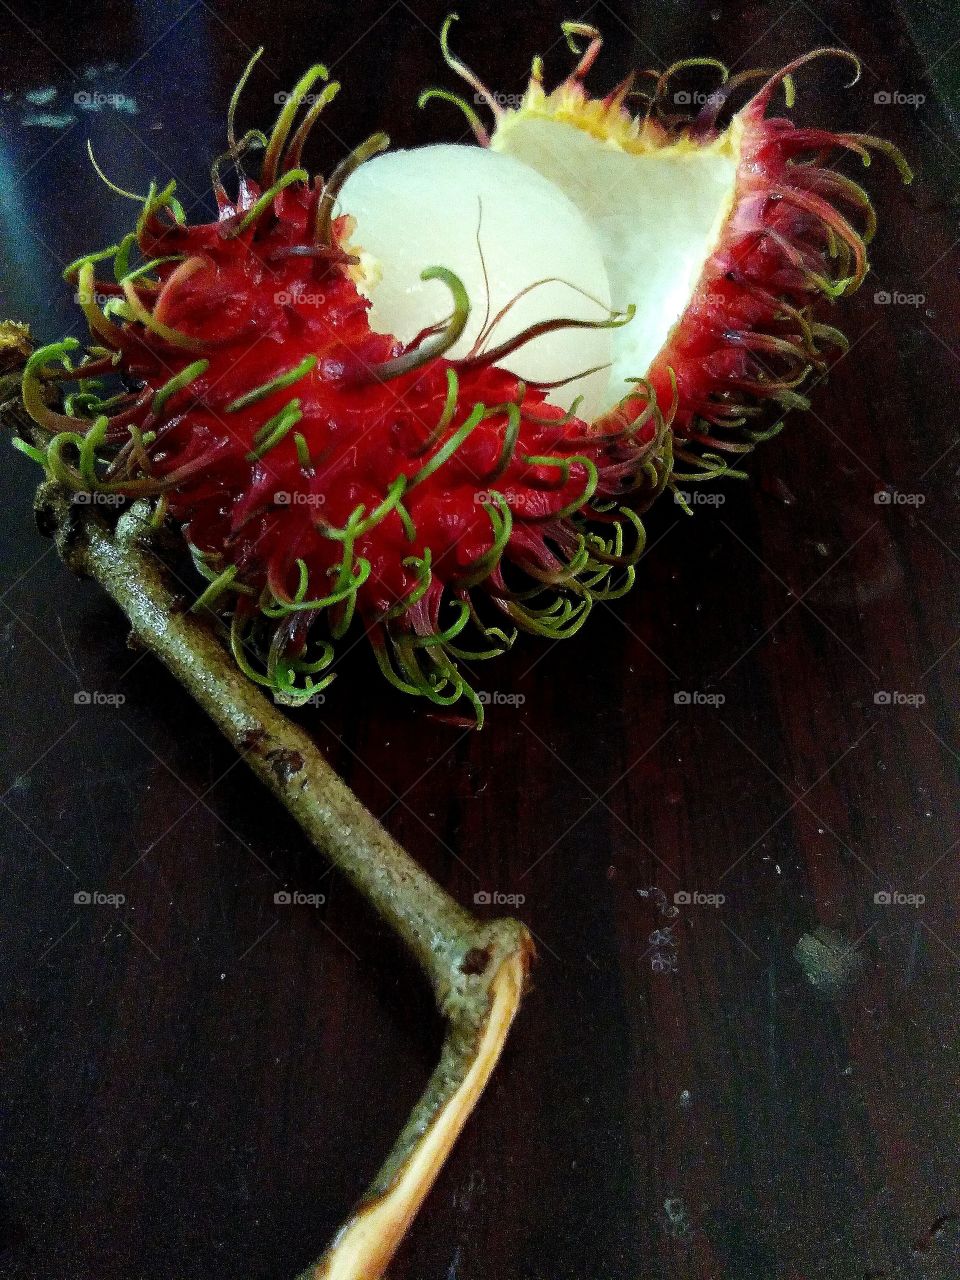 The rambutan is a medium-sized tropical tree in the family Sapindaceae.